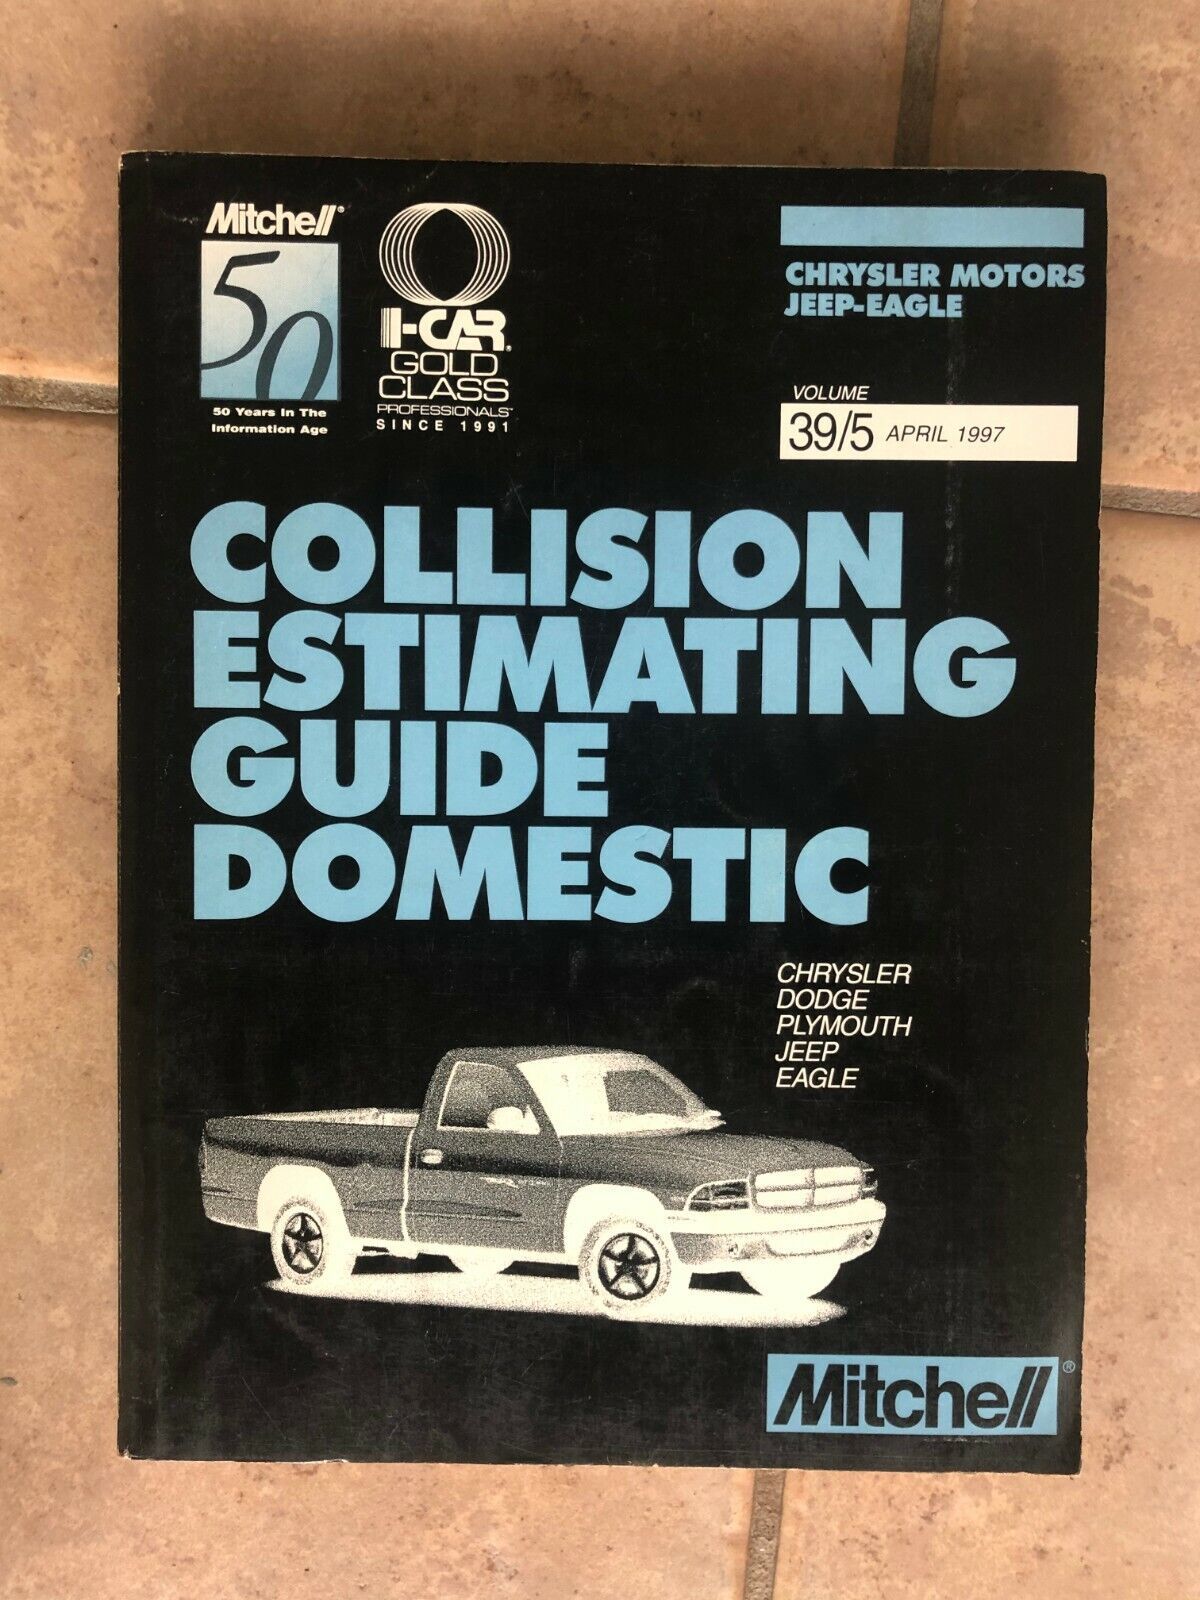 1997 Mitchell Dodge Chrysler Jeep Plymouth Collision Estimating Manual Guide  - $37.00